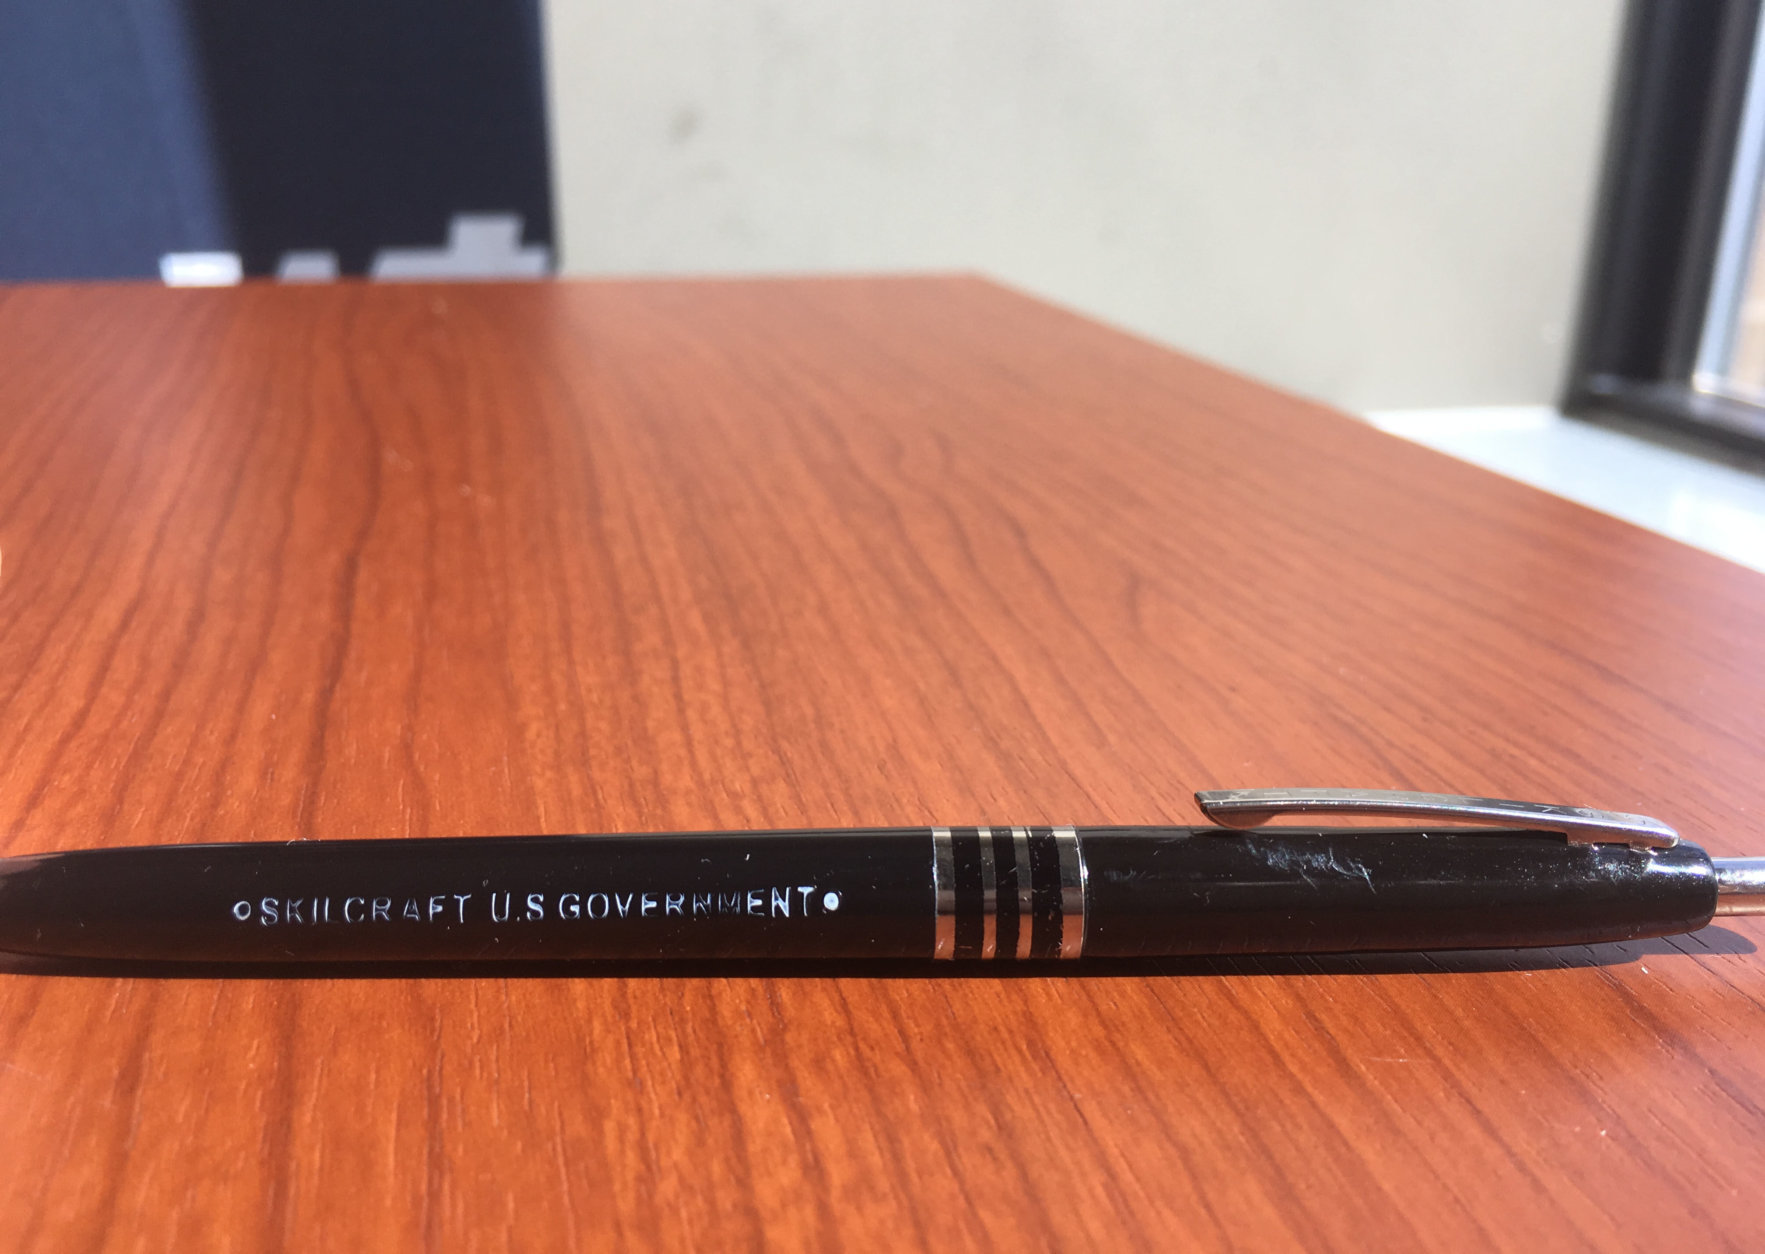 The instantly recognizable government pen. (WTOP/Jack Moore)